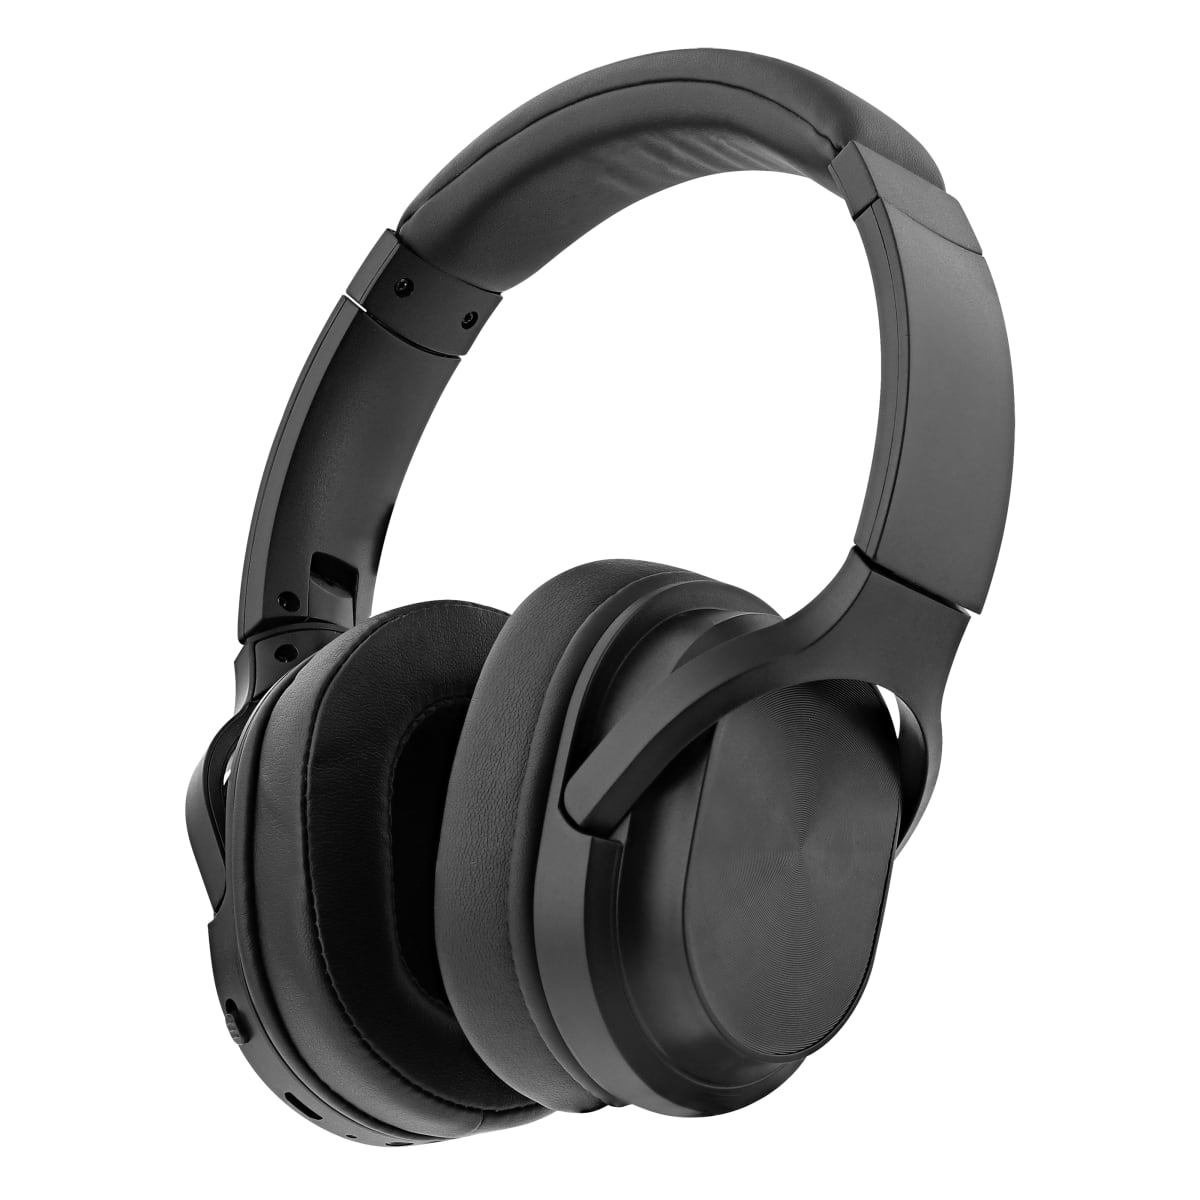 FLOW Bluetooth headphone black with active noise cancelling